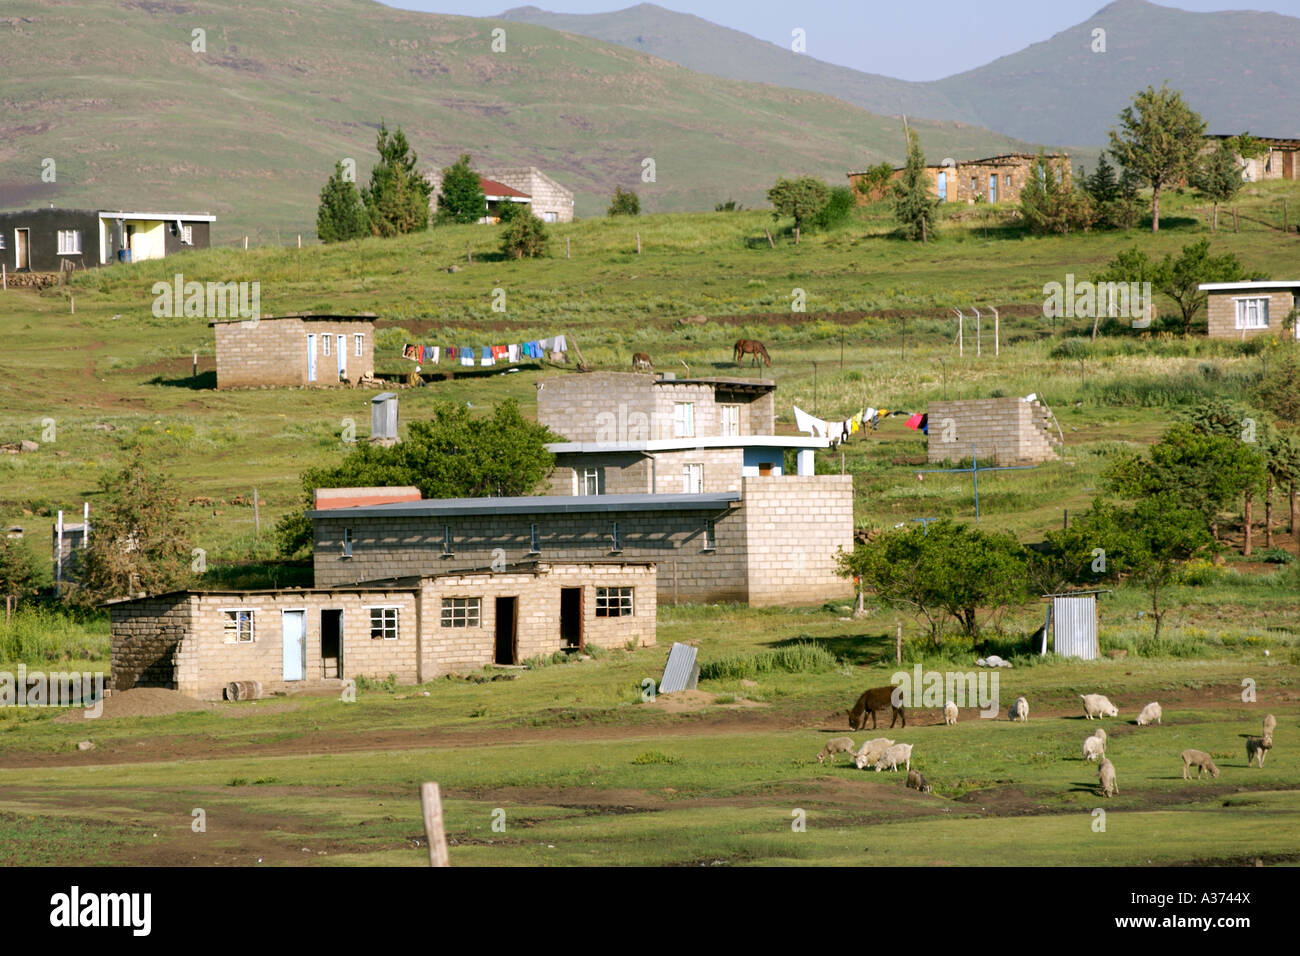 The village of Semonkong in Lesotho. Stock Photo